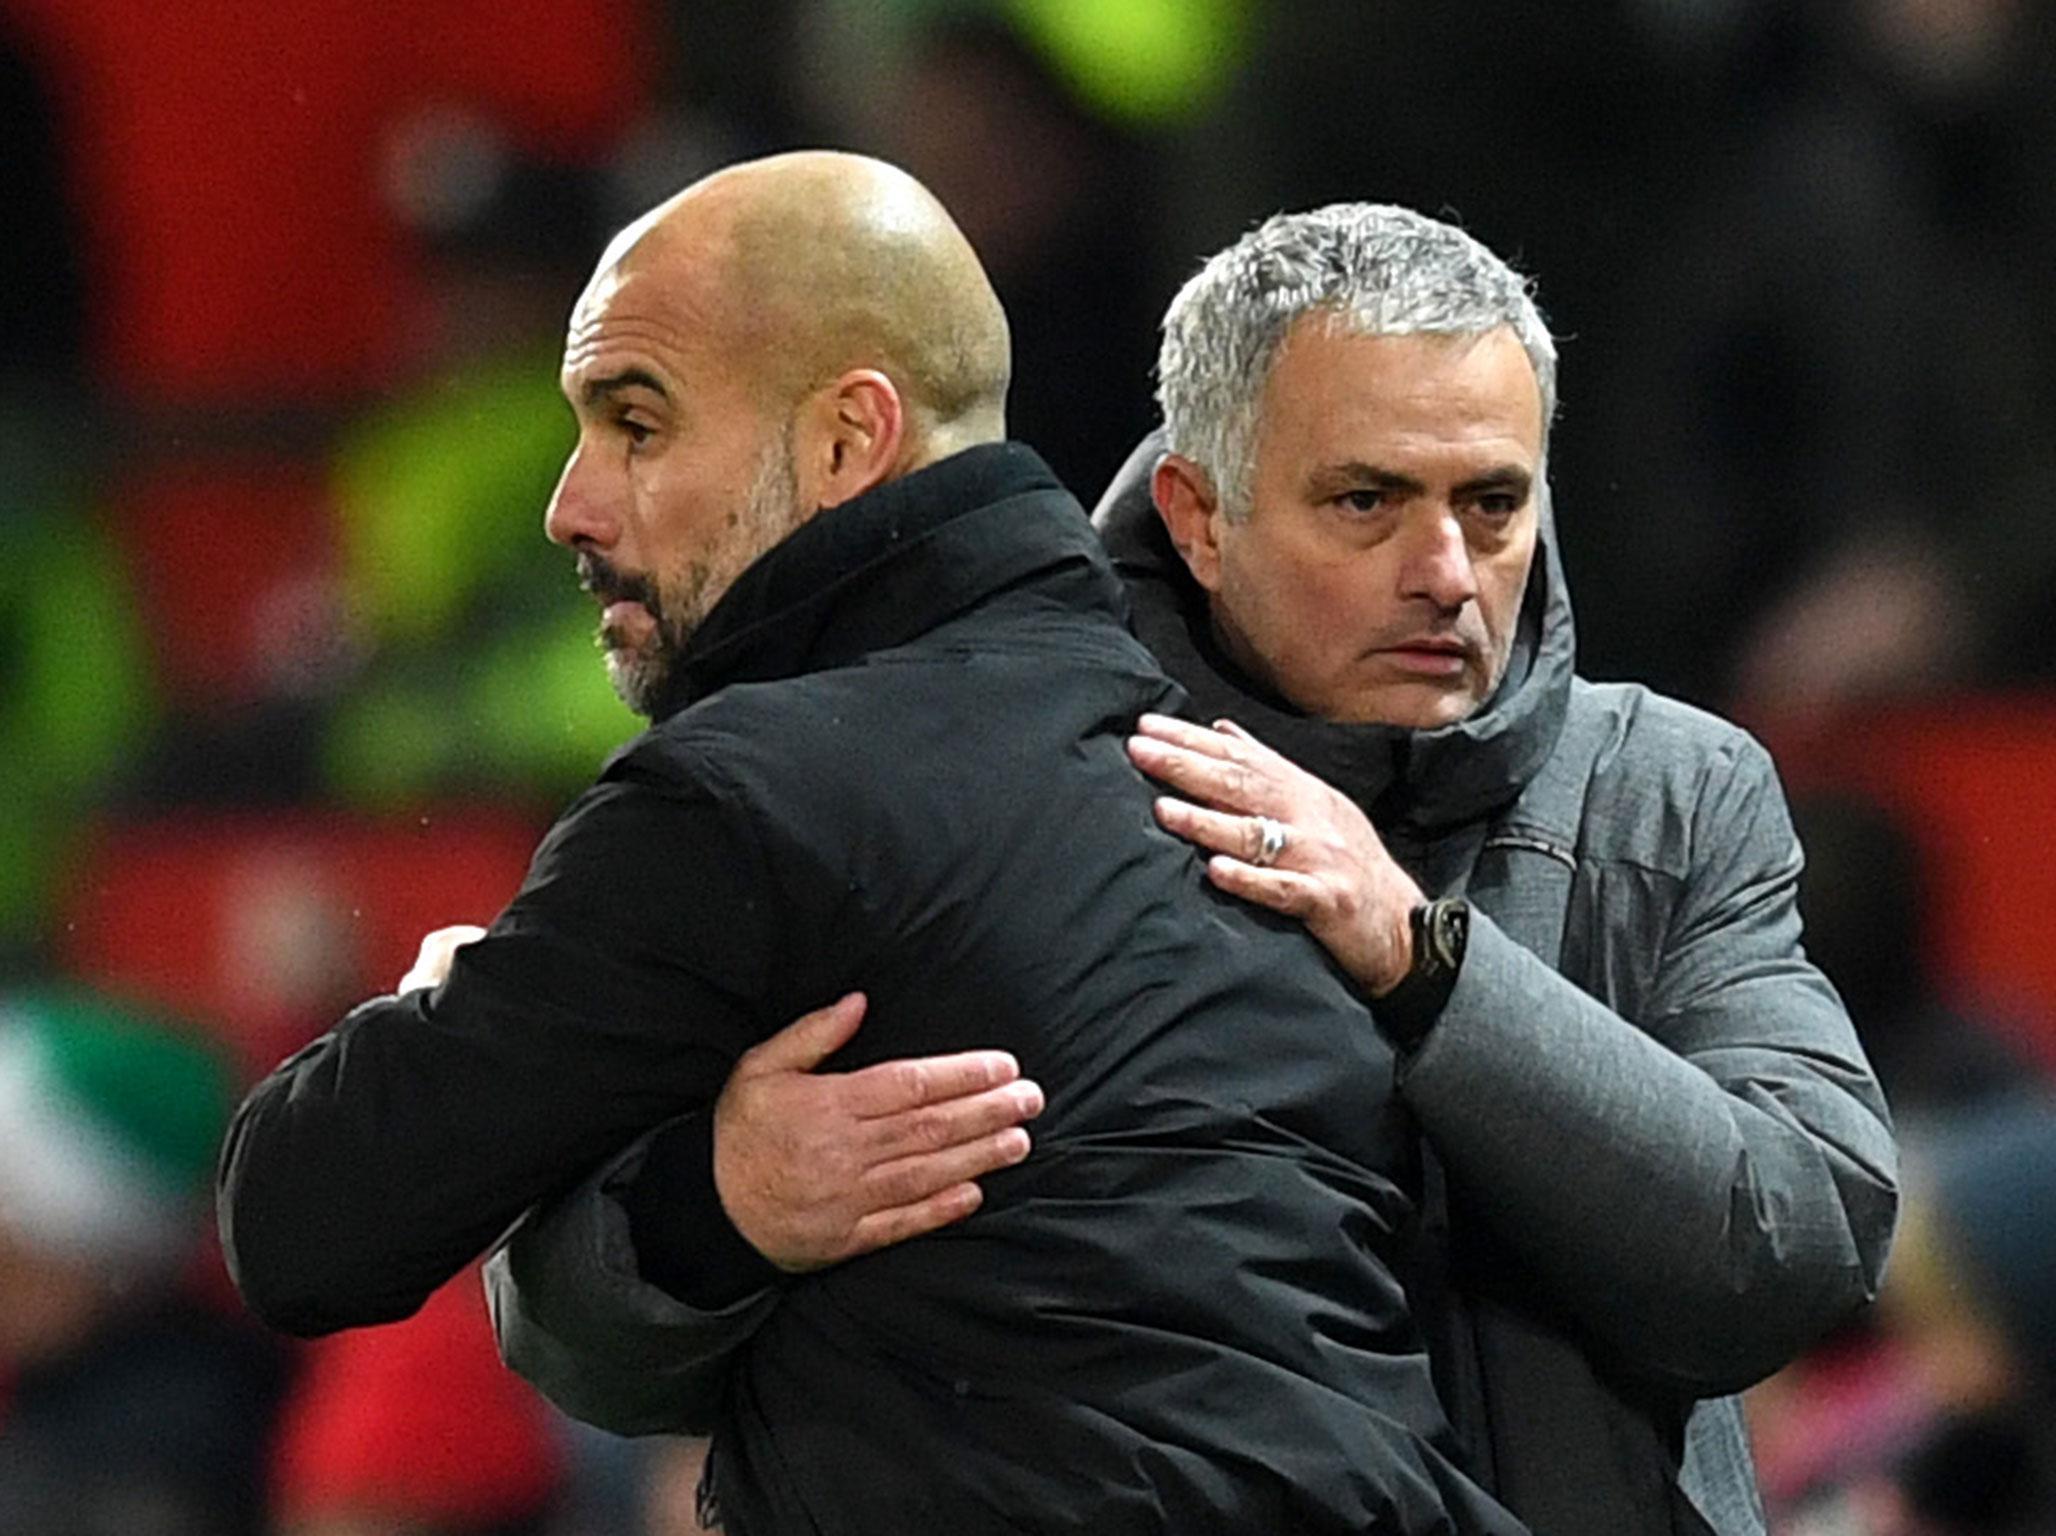 Guardiola and Mourinho's rivalry has become increasingly one-sided